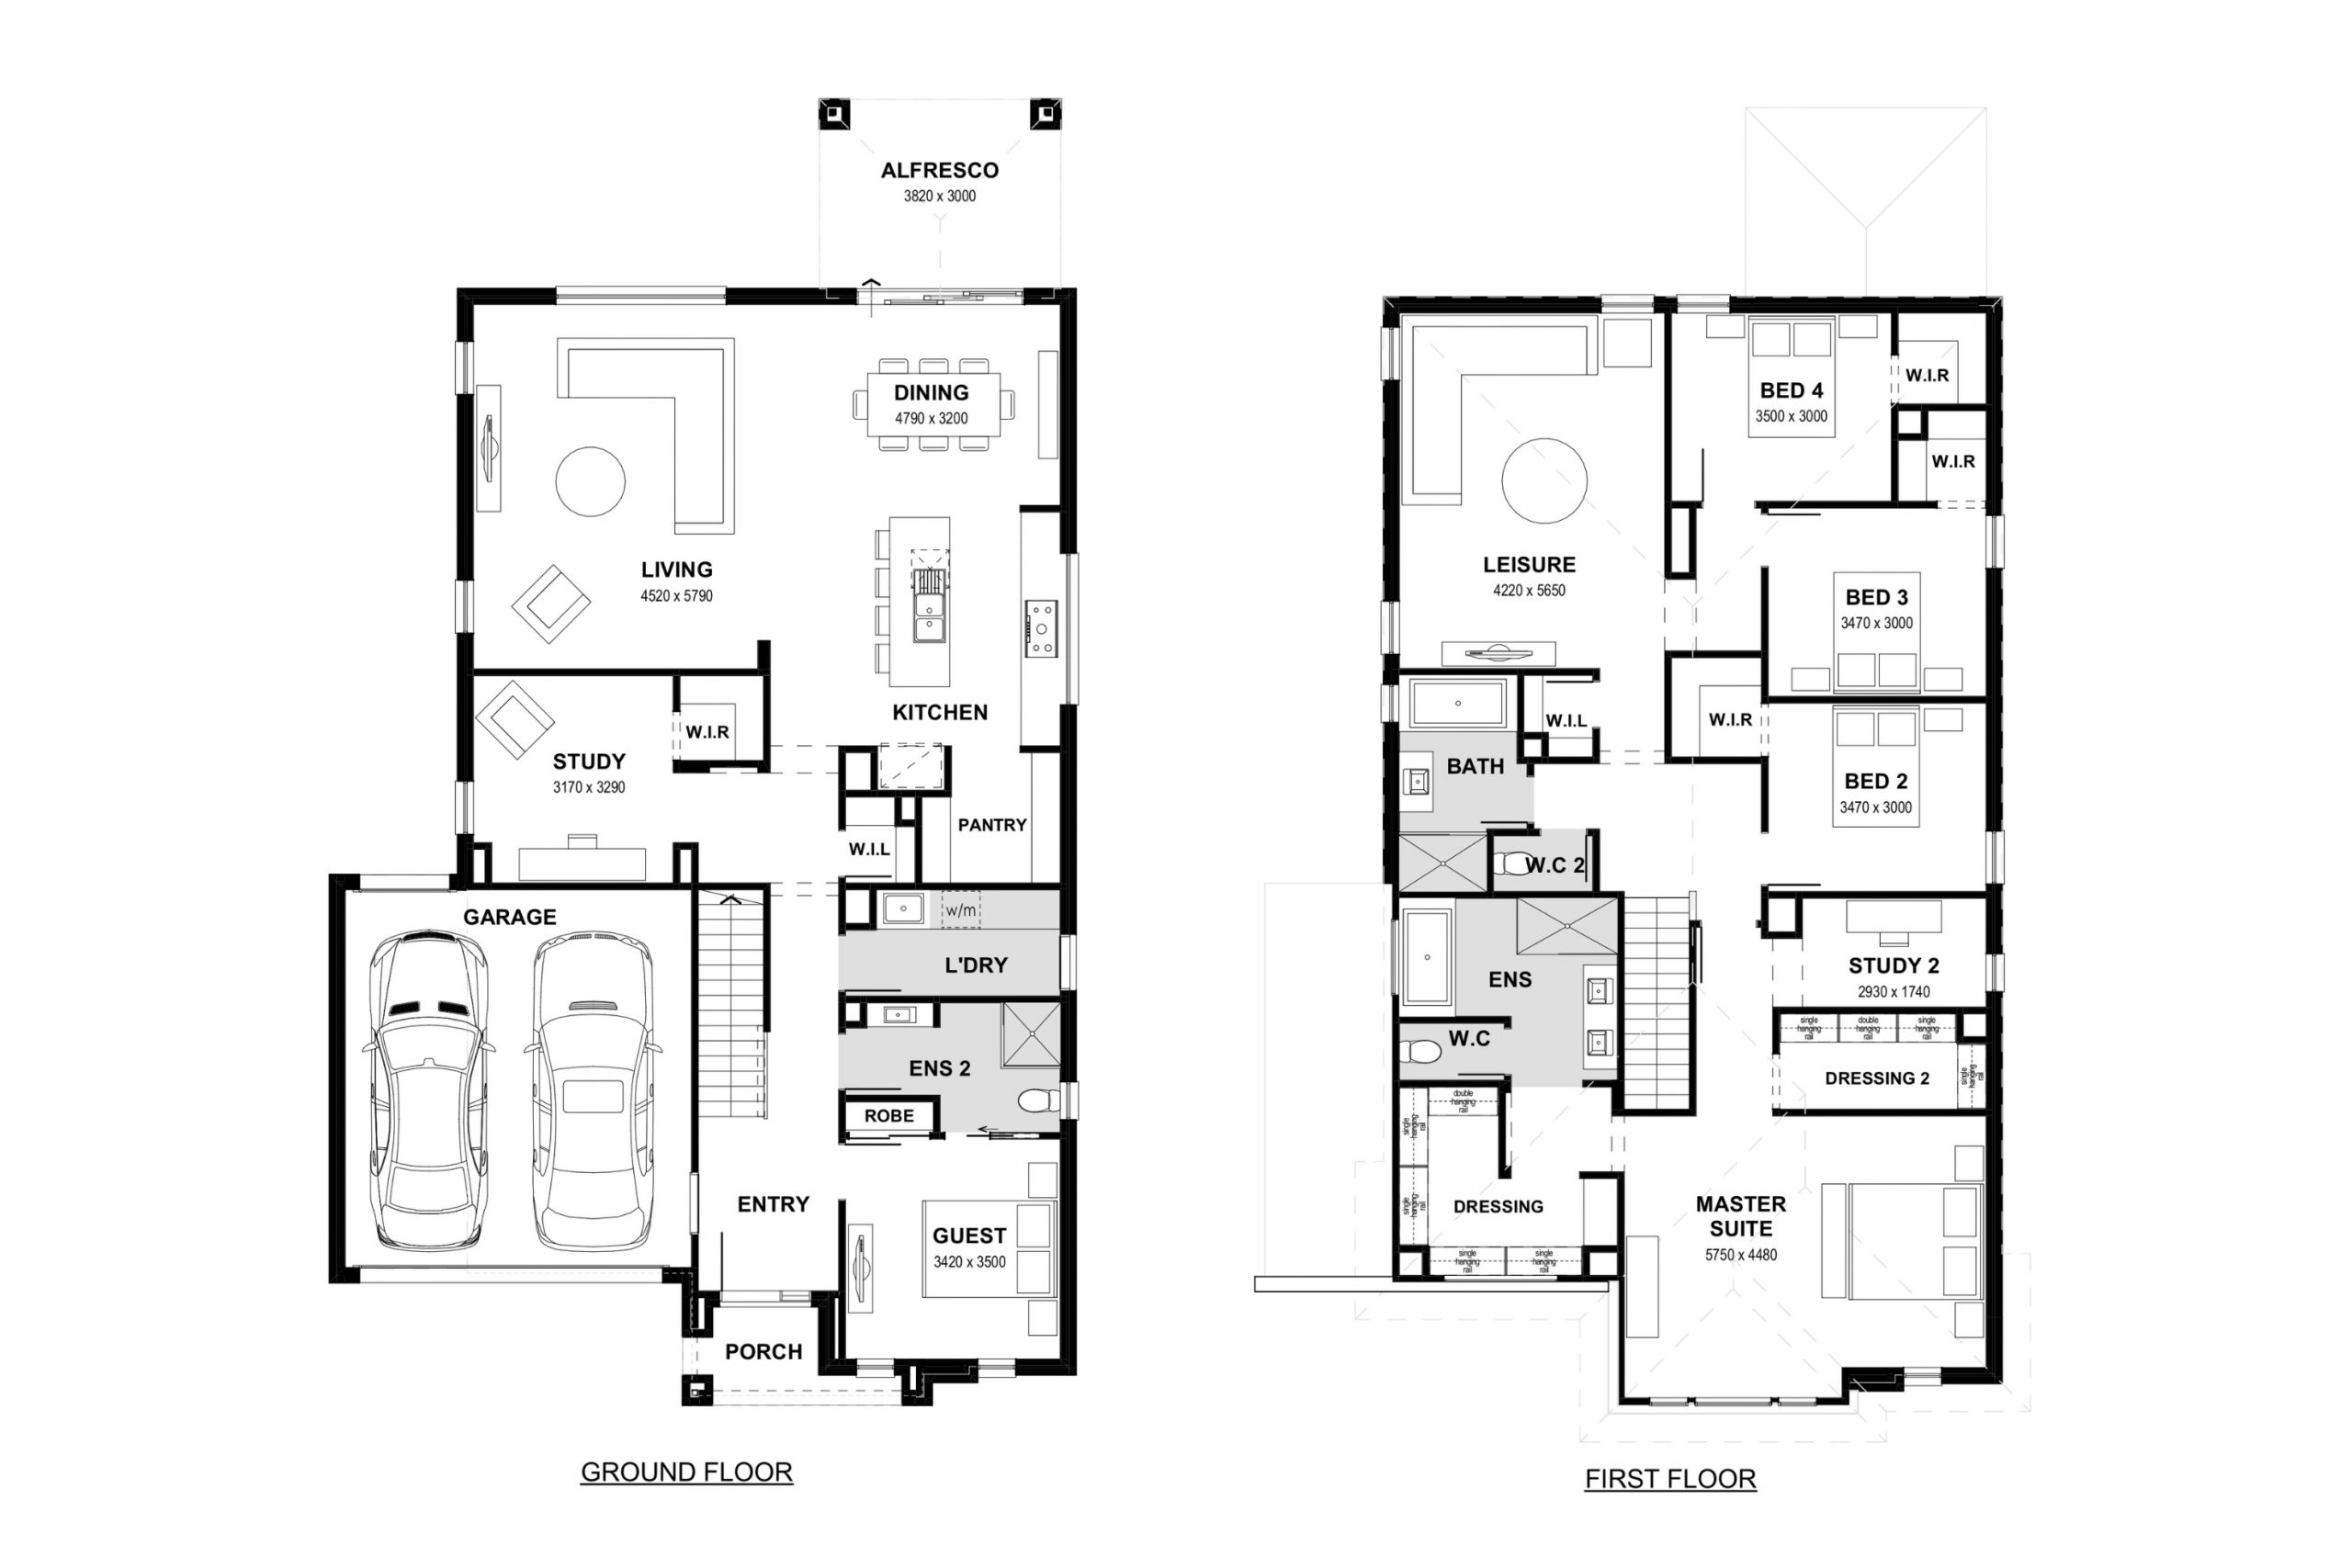 Home for a Cure Floorplan